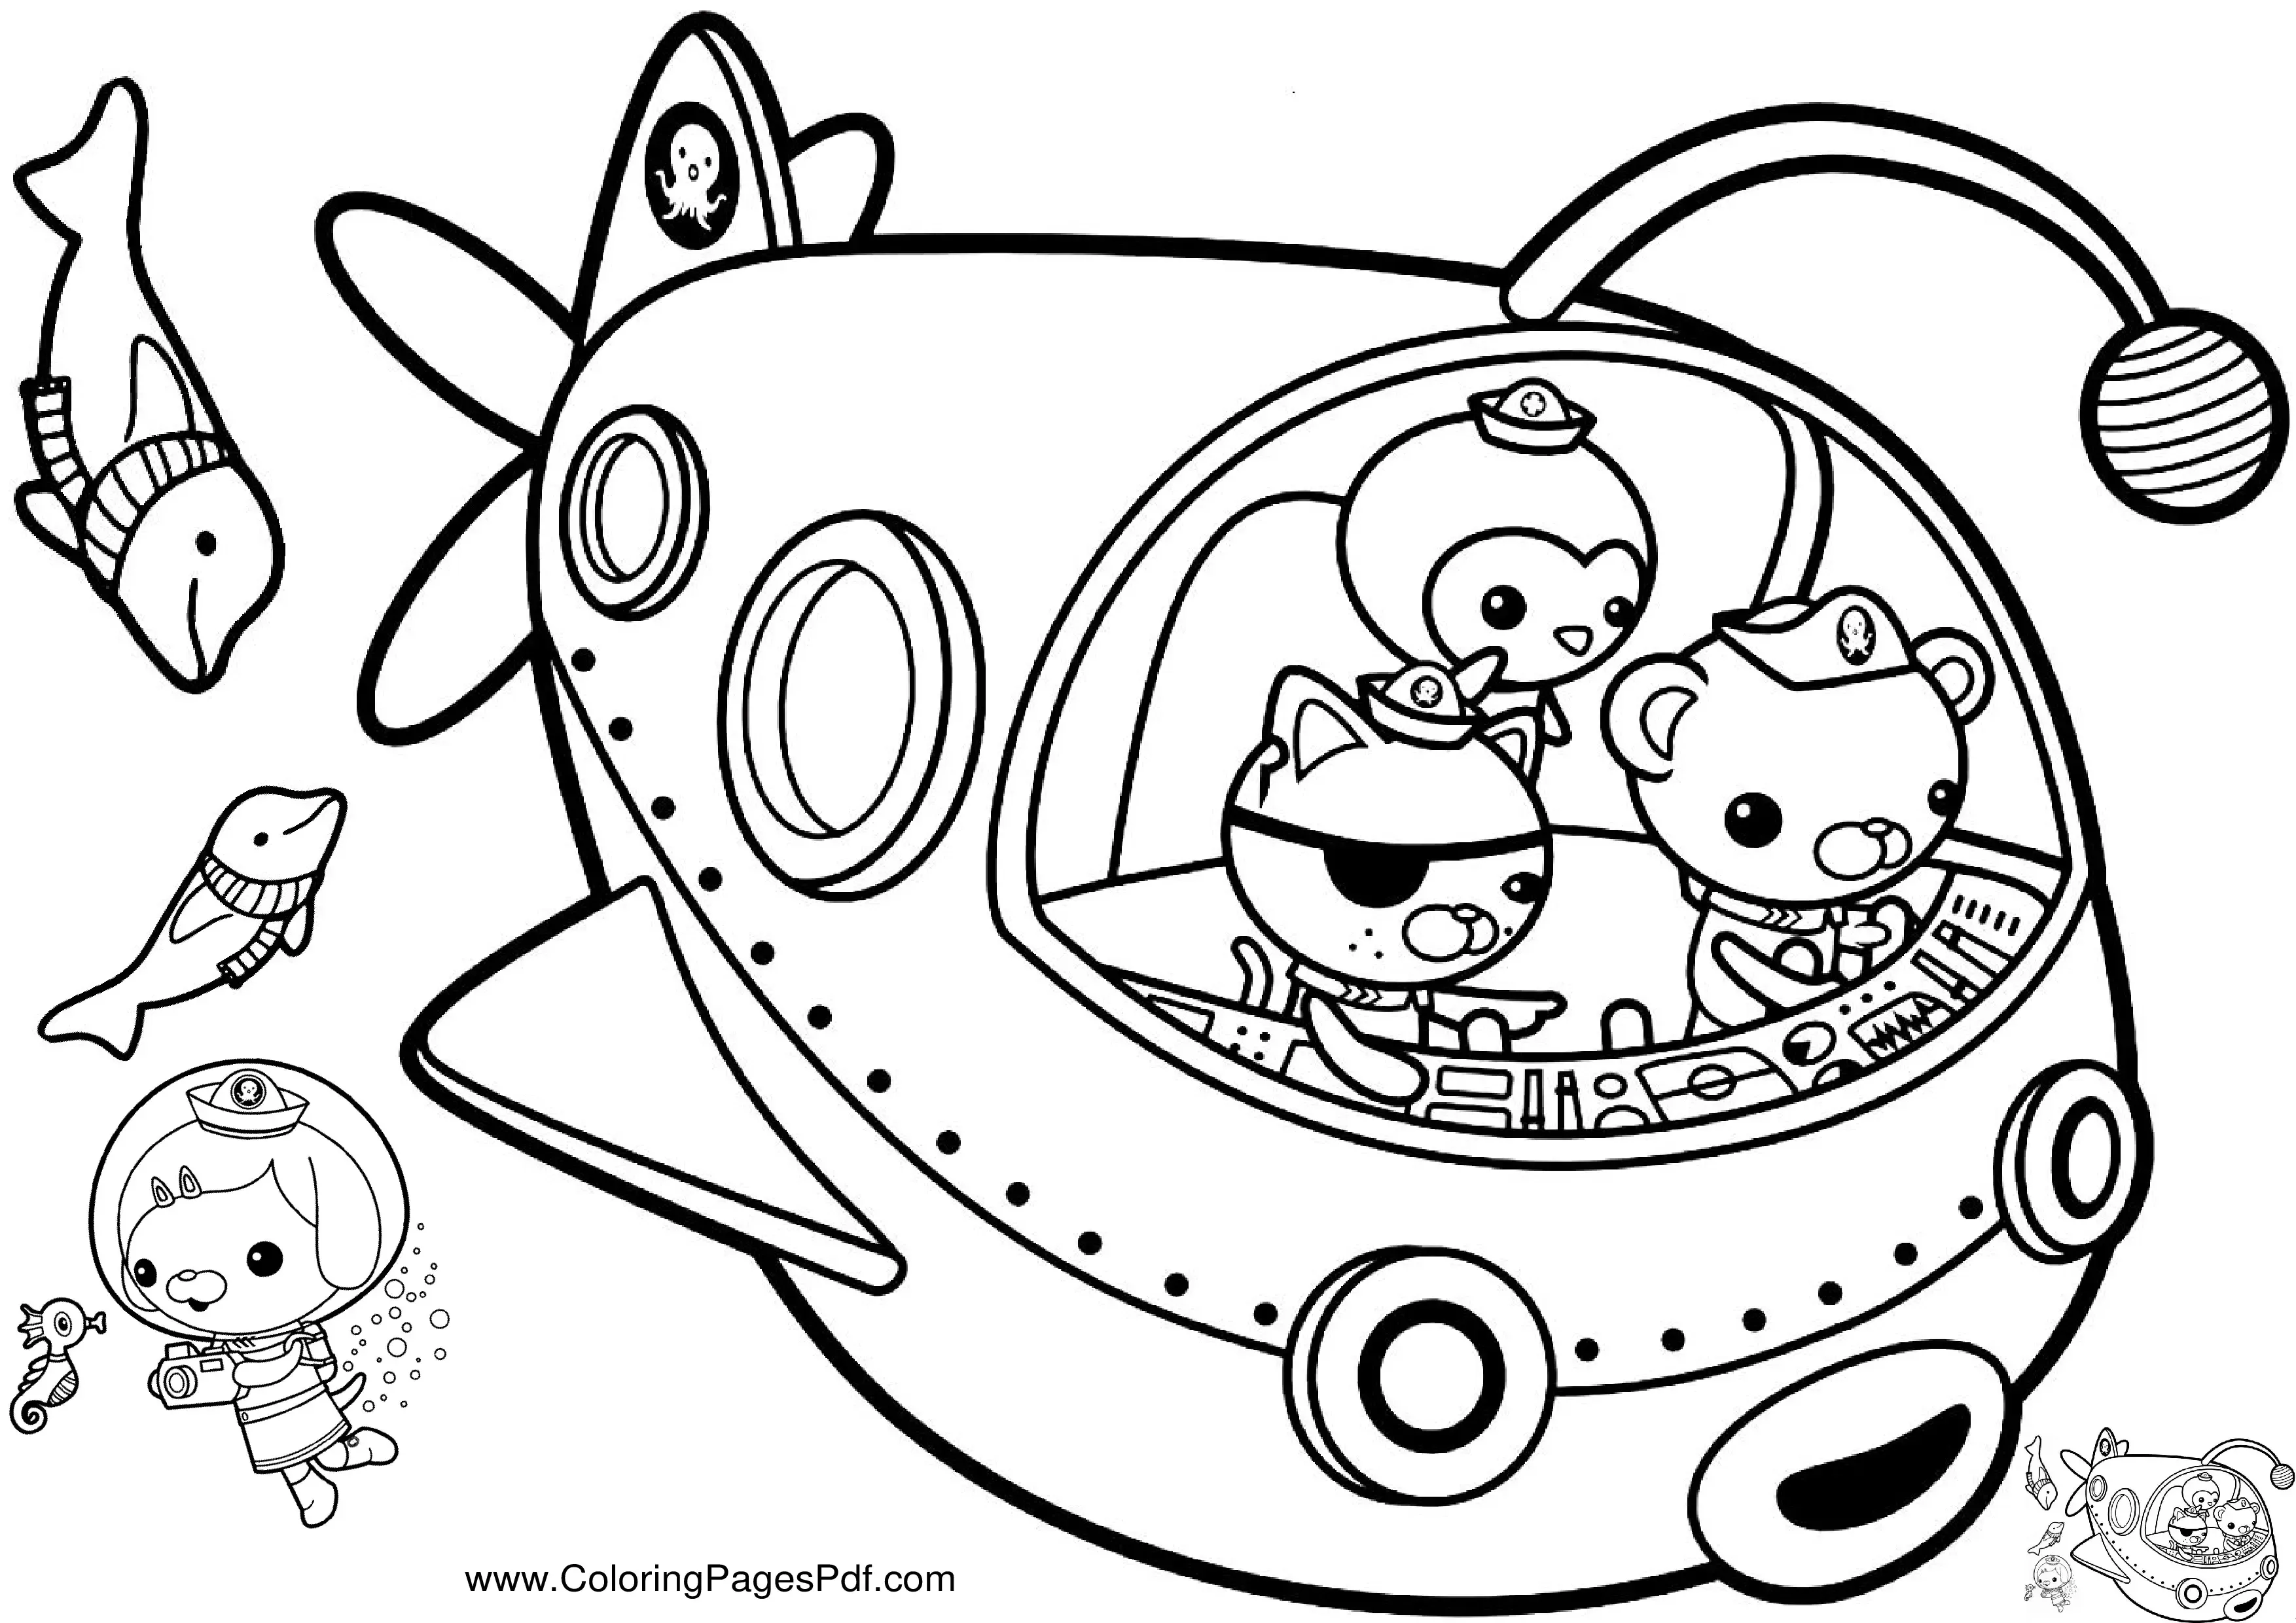 Octonauts coloring page